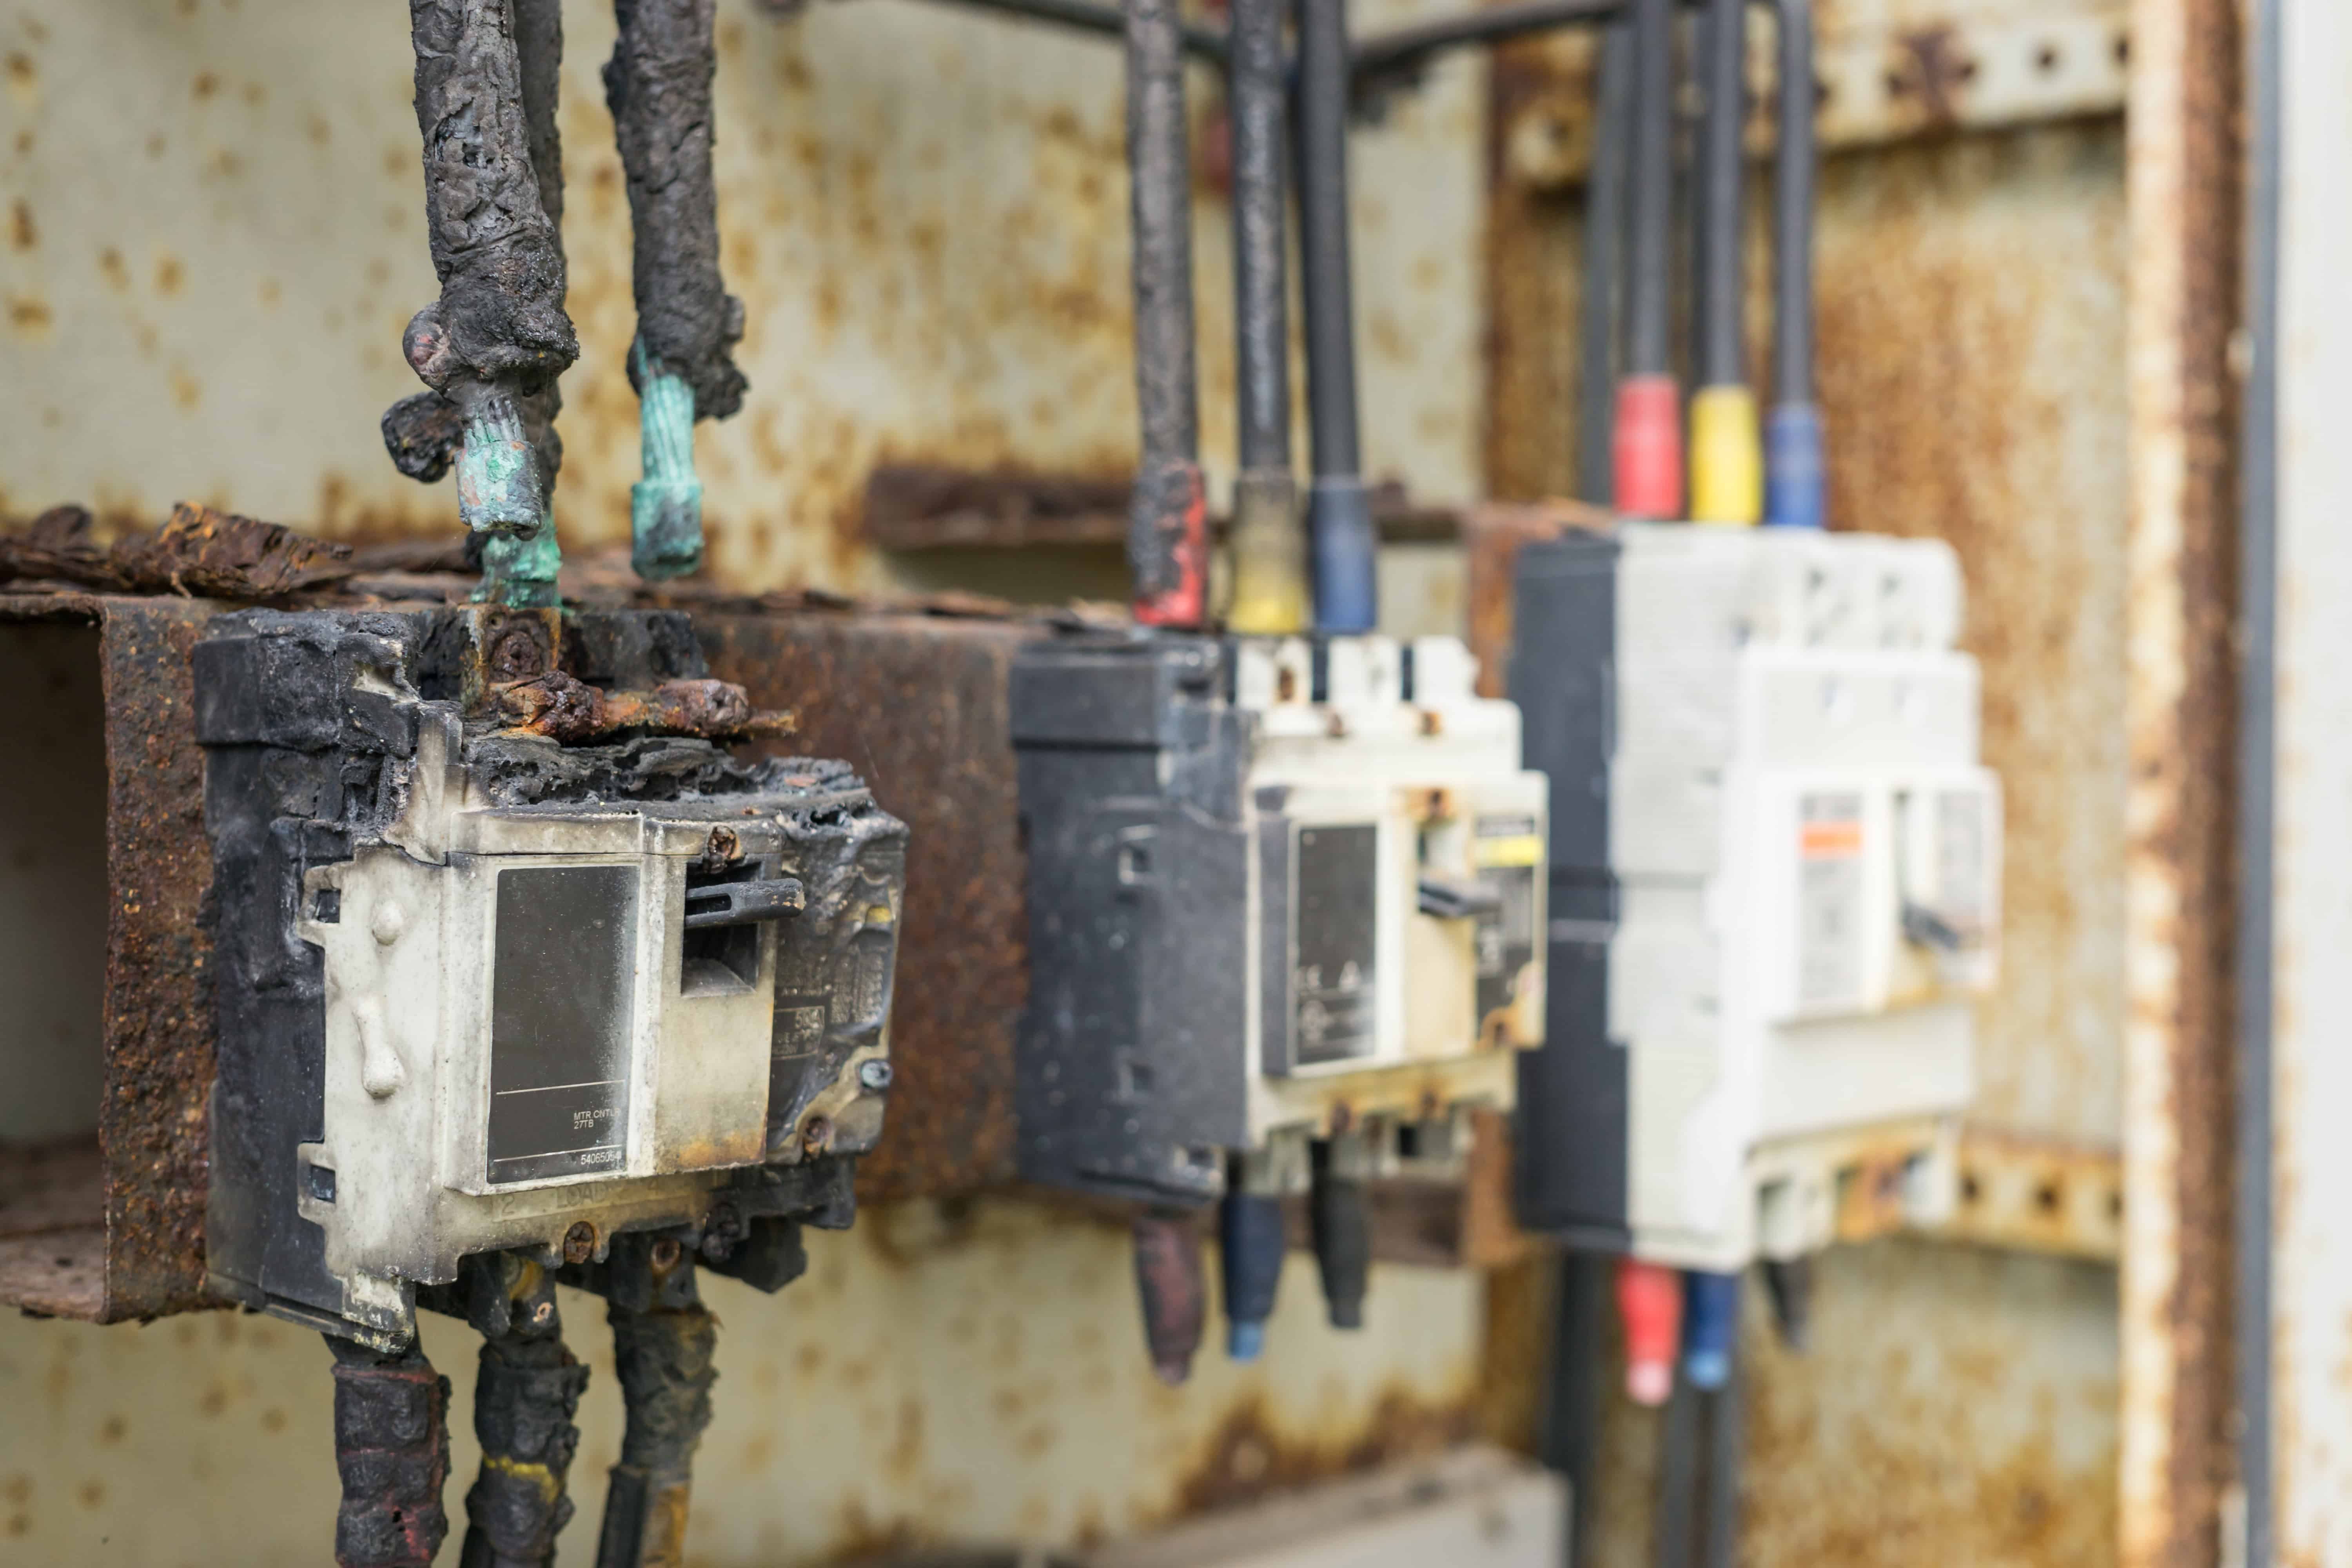 Electrical preventative maintenance in an industrial facility